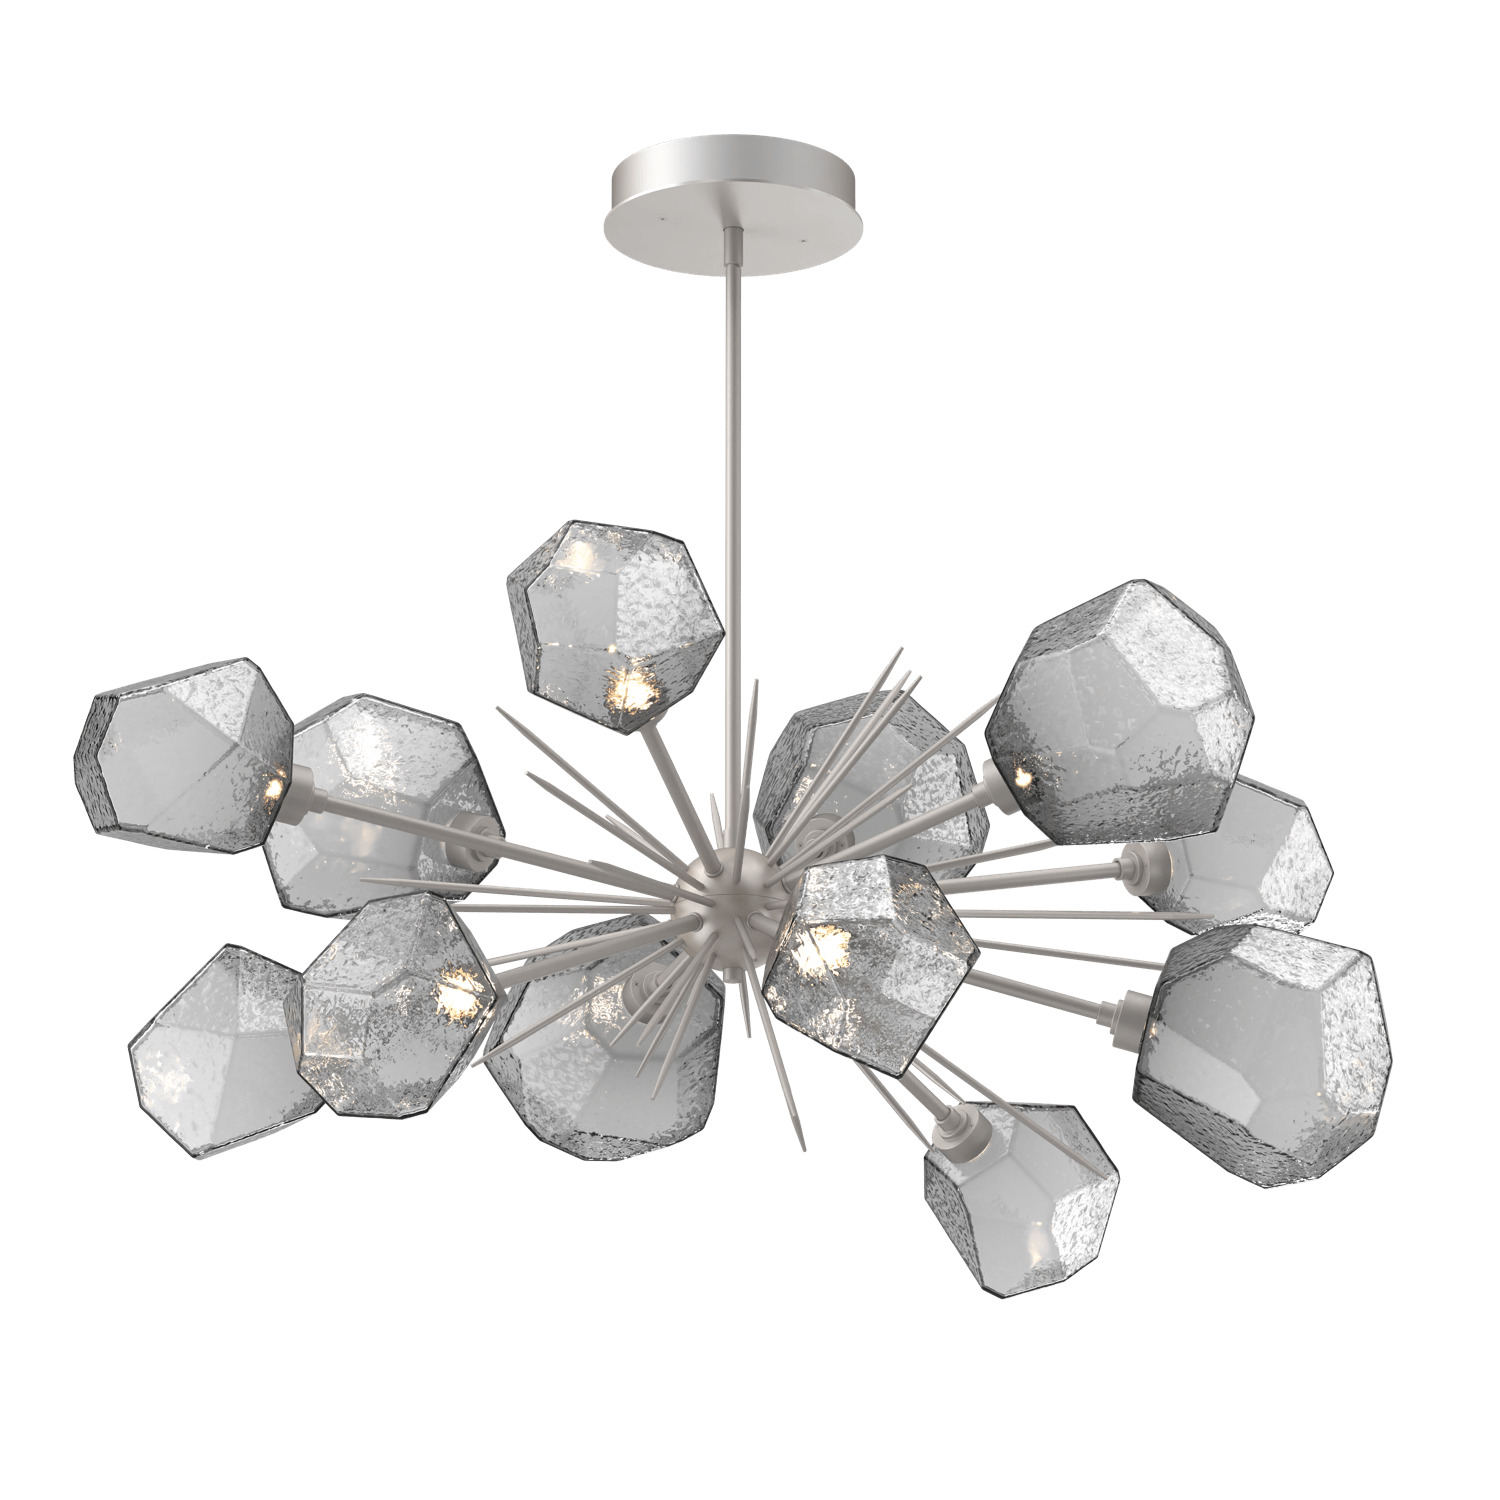 PLB0039-0D-BS-S-Hammerton-Studio-Gem-43-inch-oval-starburst-chandelier-with-metallic-beige-silver-finish-and-smoke-blown-glass-shades-and-LED-lamping